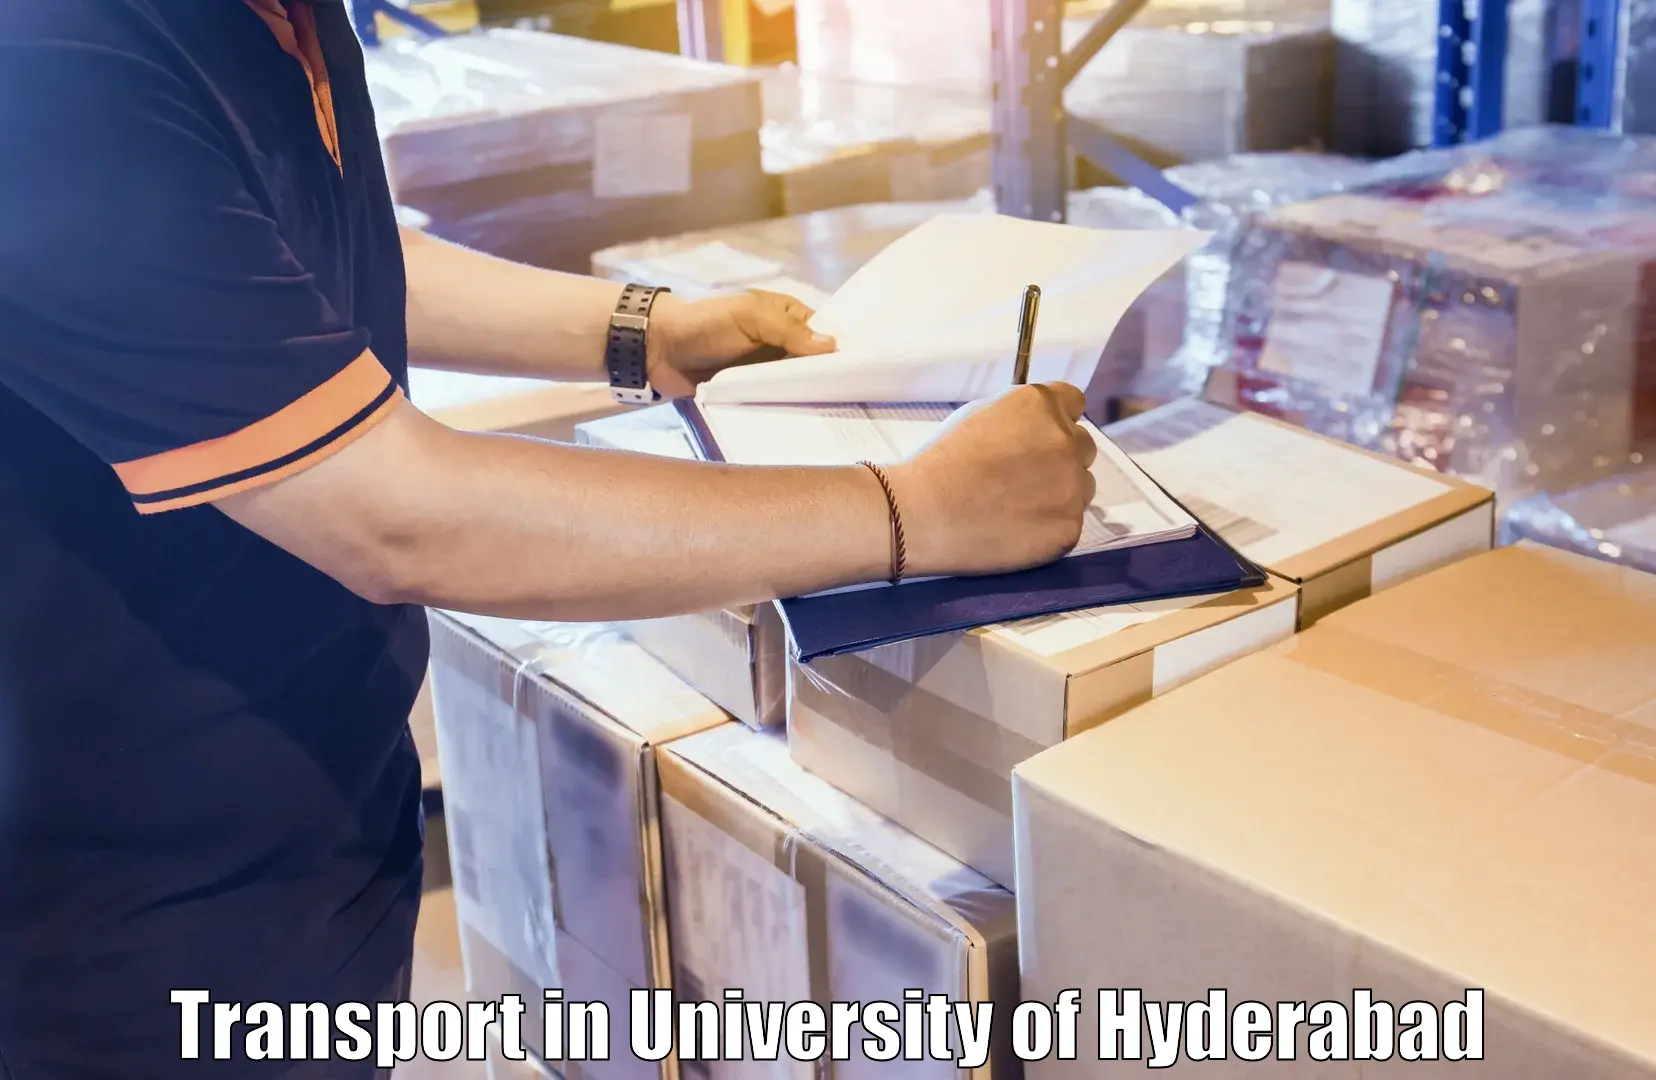 Interstate transport services in University of Hyderabad